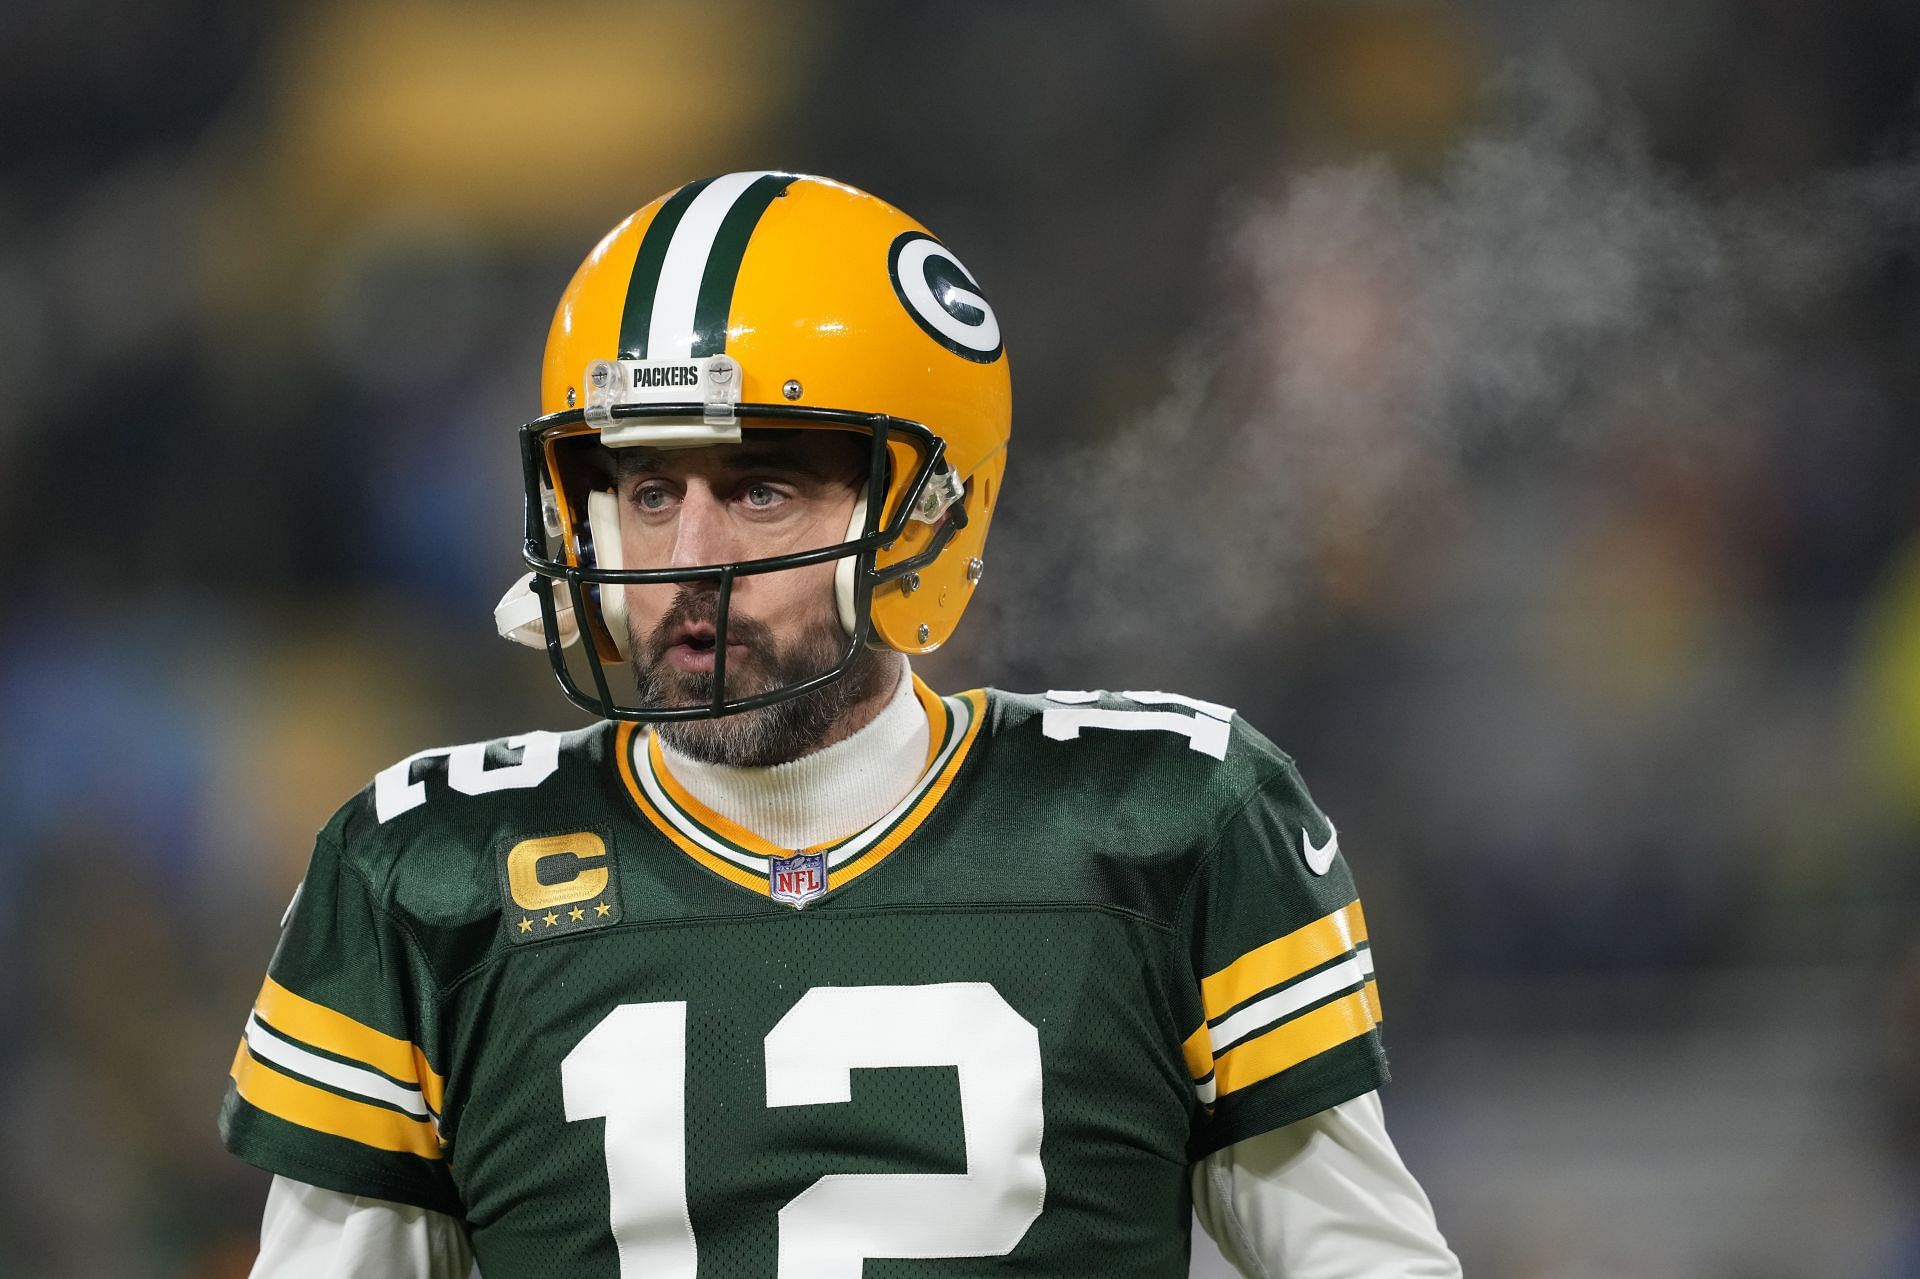 Rodgers is set to play for the Jets in 2023